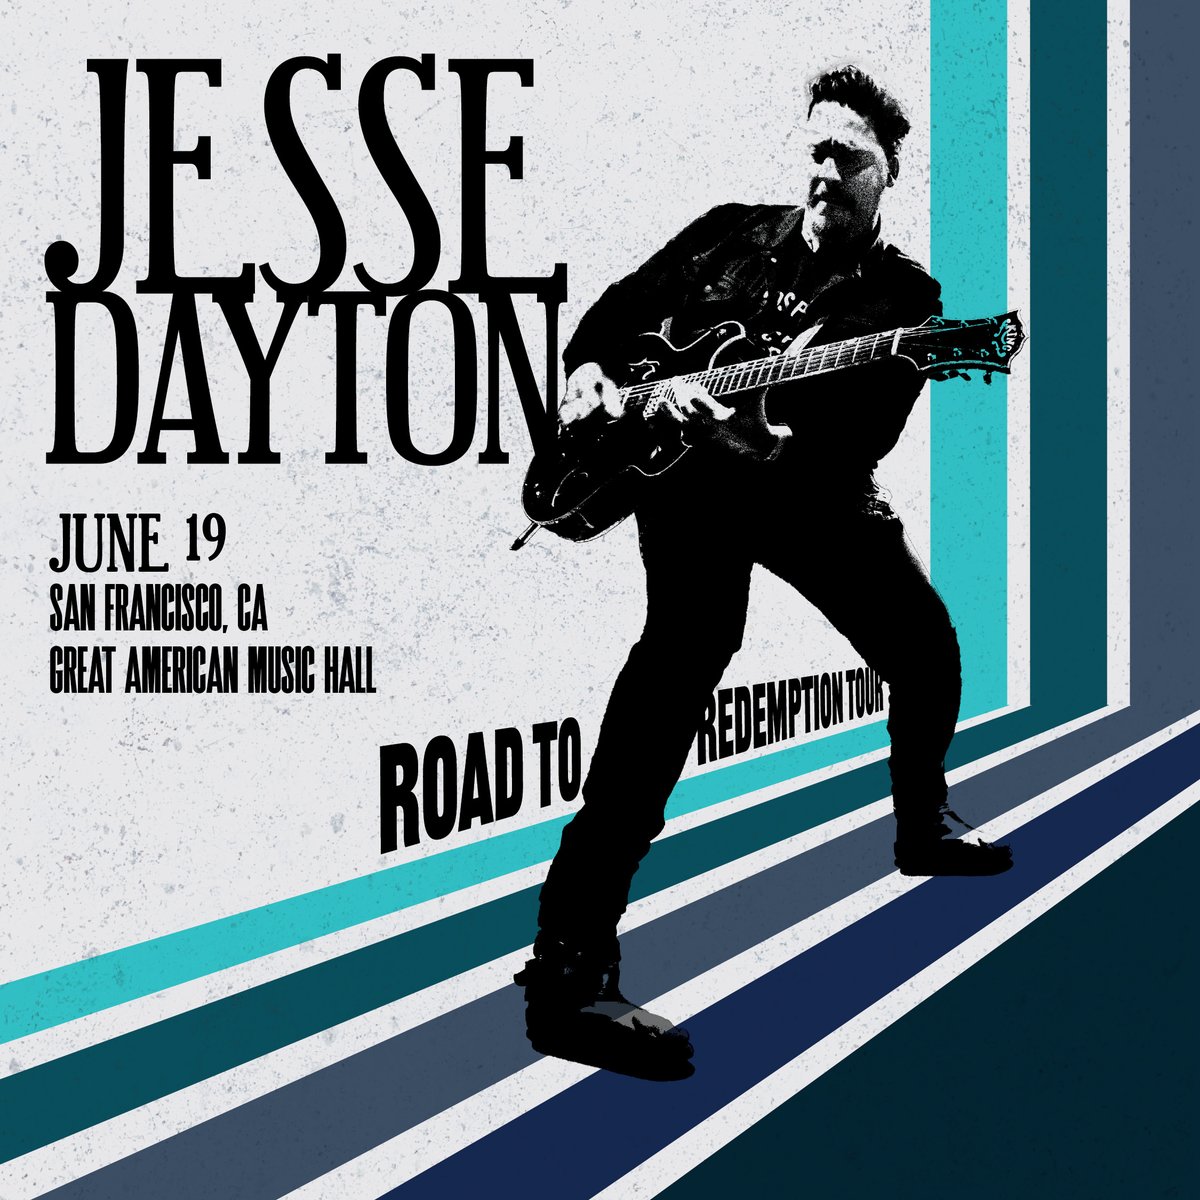 💥JUST ANNOUNCED!💥 The Lone Star State’s alt-country extraordinaire @jessedayton is headed to GAMH for an exclusive performance on June 19th !!! 🌵✨🌓✨🏜️ ⏳On sale Fri, 3/22 @ 10am! 👉 Venue Presale on Thu, 3/21 @ 10am 🔓 PWD: NIGHTBRAIN 🎟️: ow.ly/R5Cm50QW7Ya